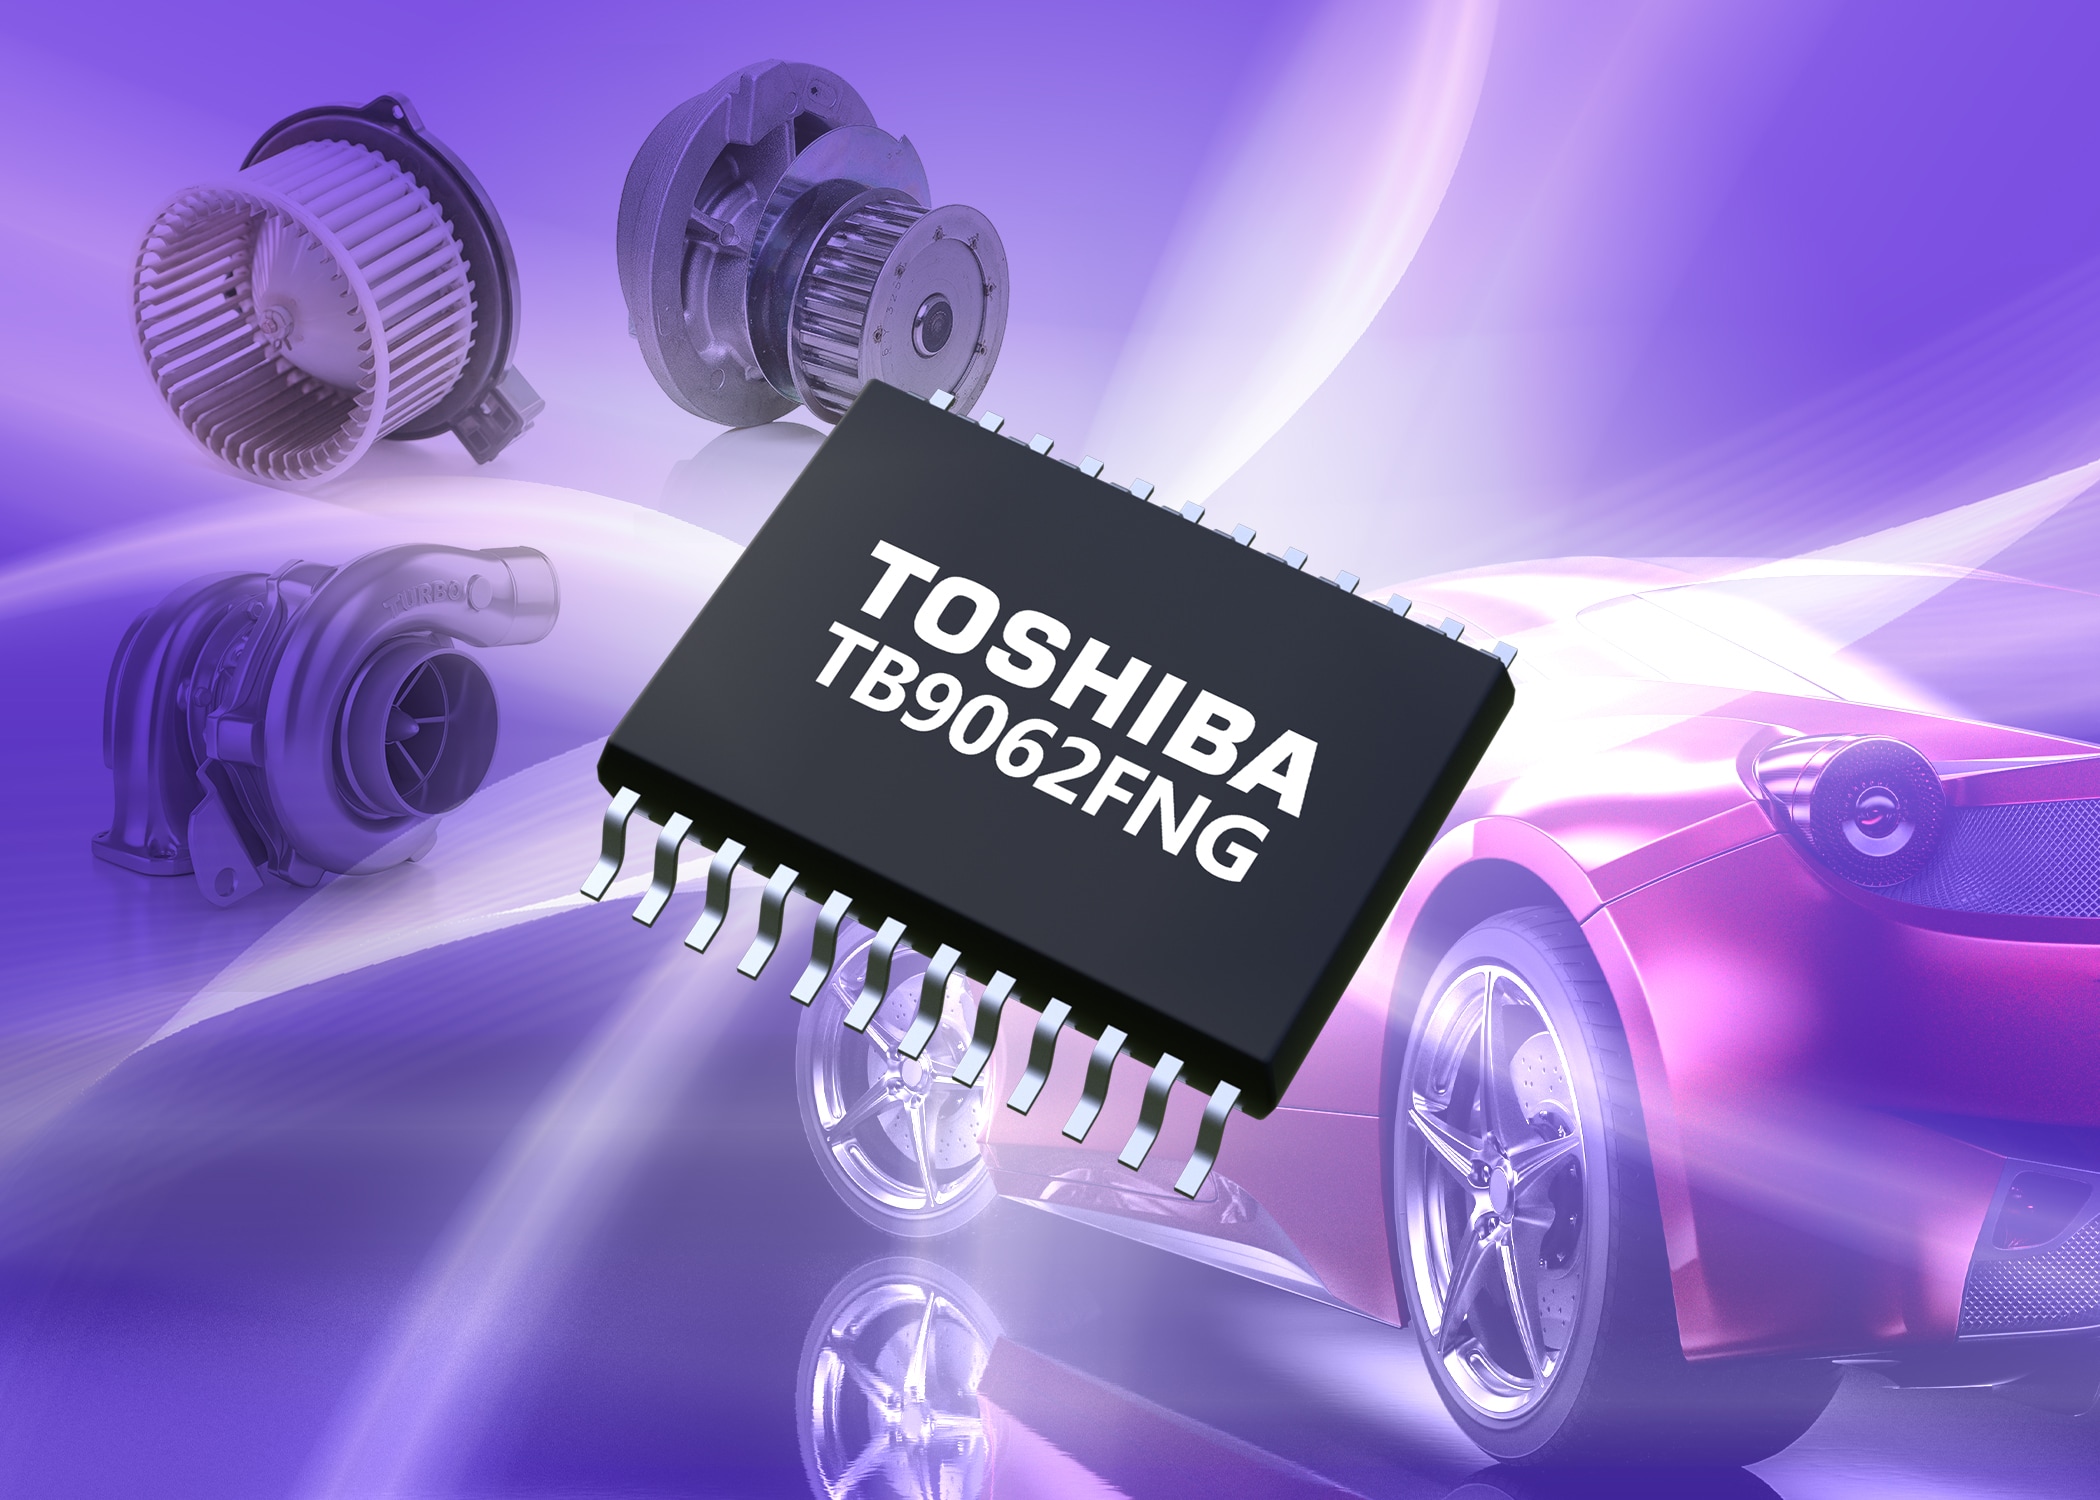 Toshiba launches sensorless control pre-driver IC for BLDC motors